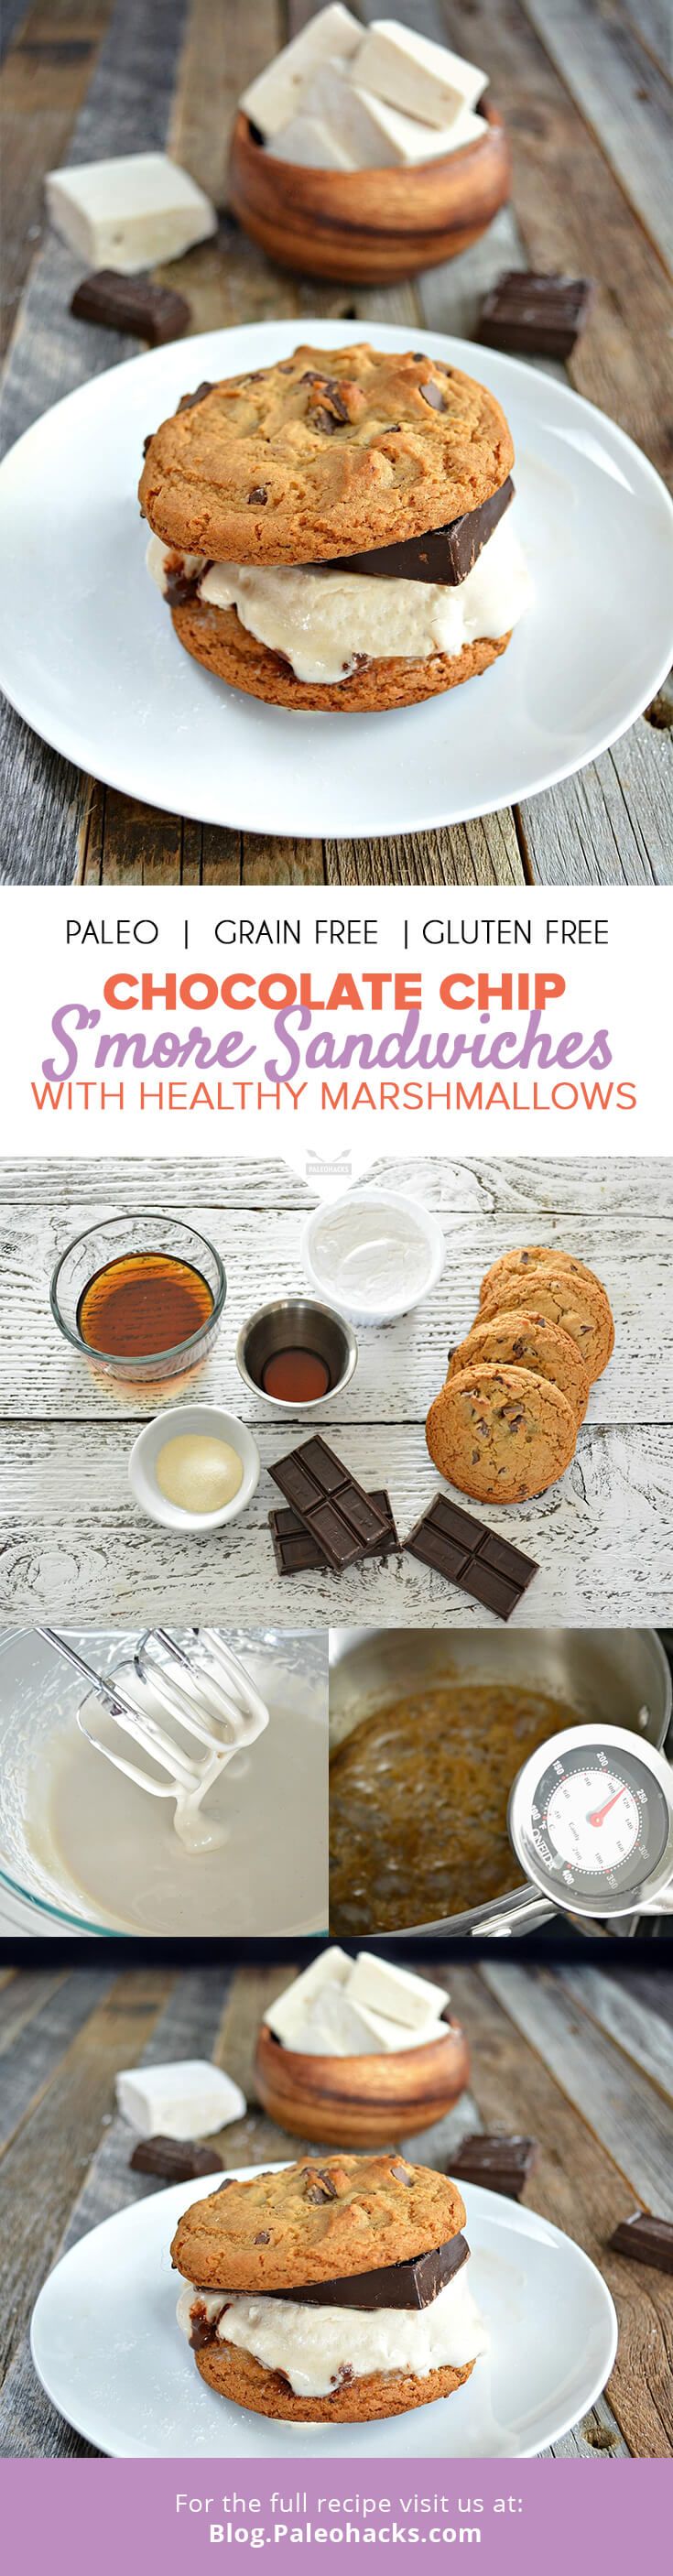 chocolate chip s'more sandwiches pin